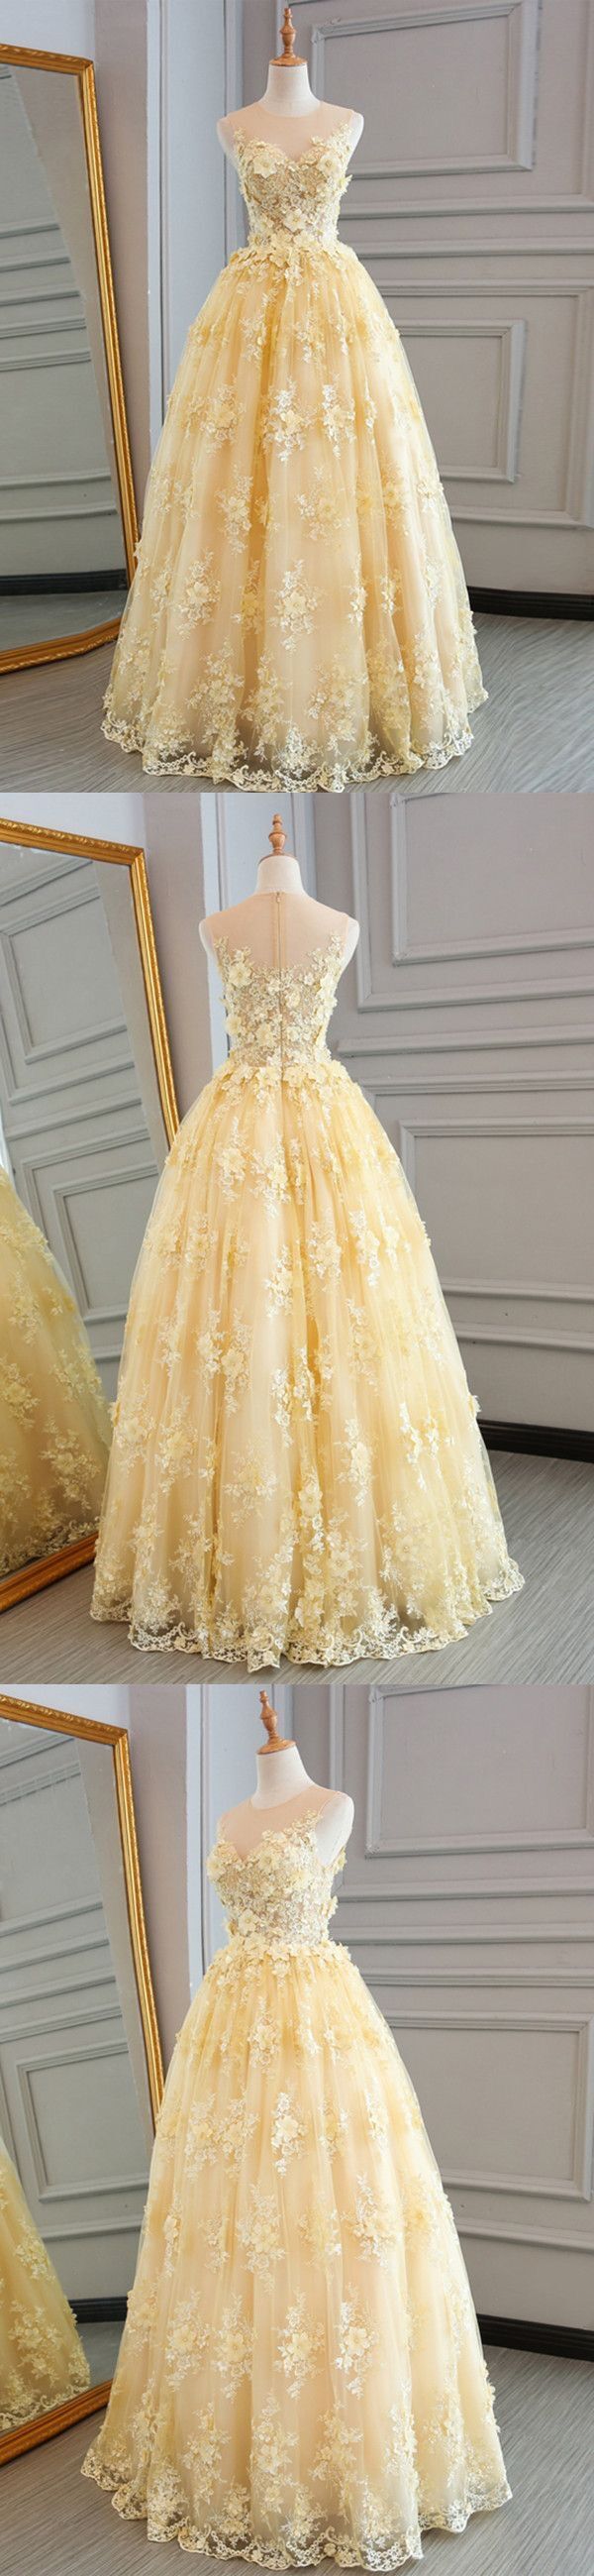 Long Prom Dresses Scoop A-line Floor-length Lace Sexy Yellow Prom Dres ...